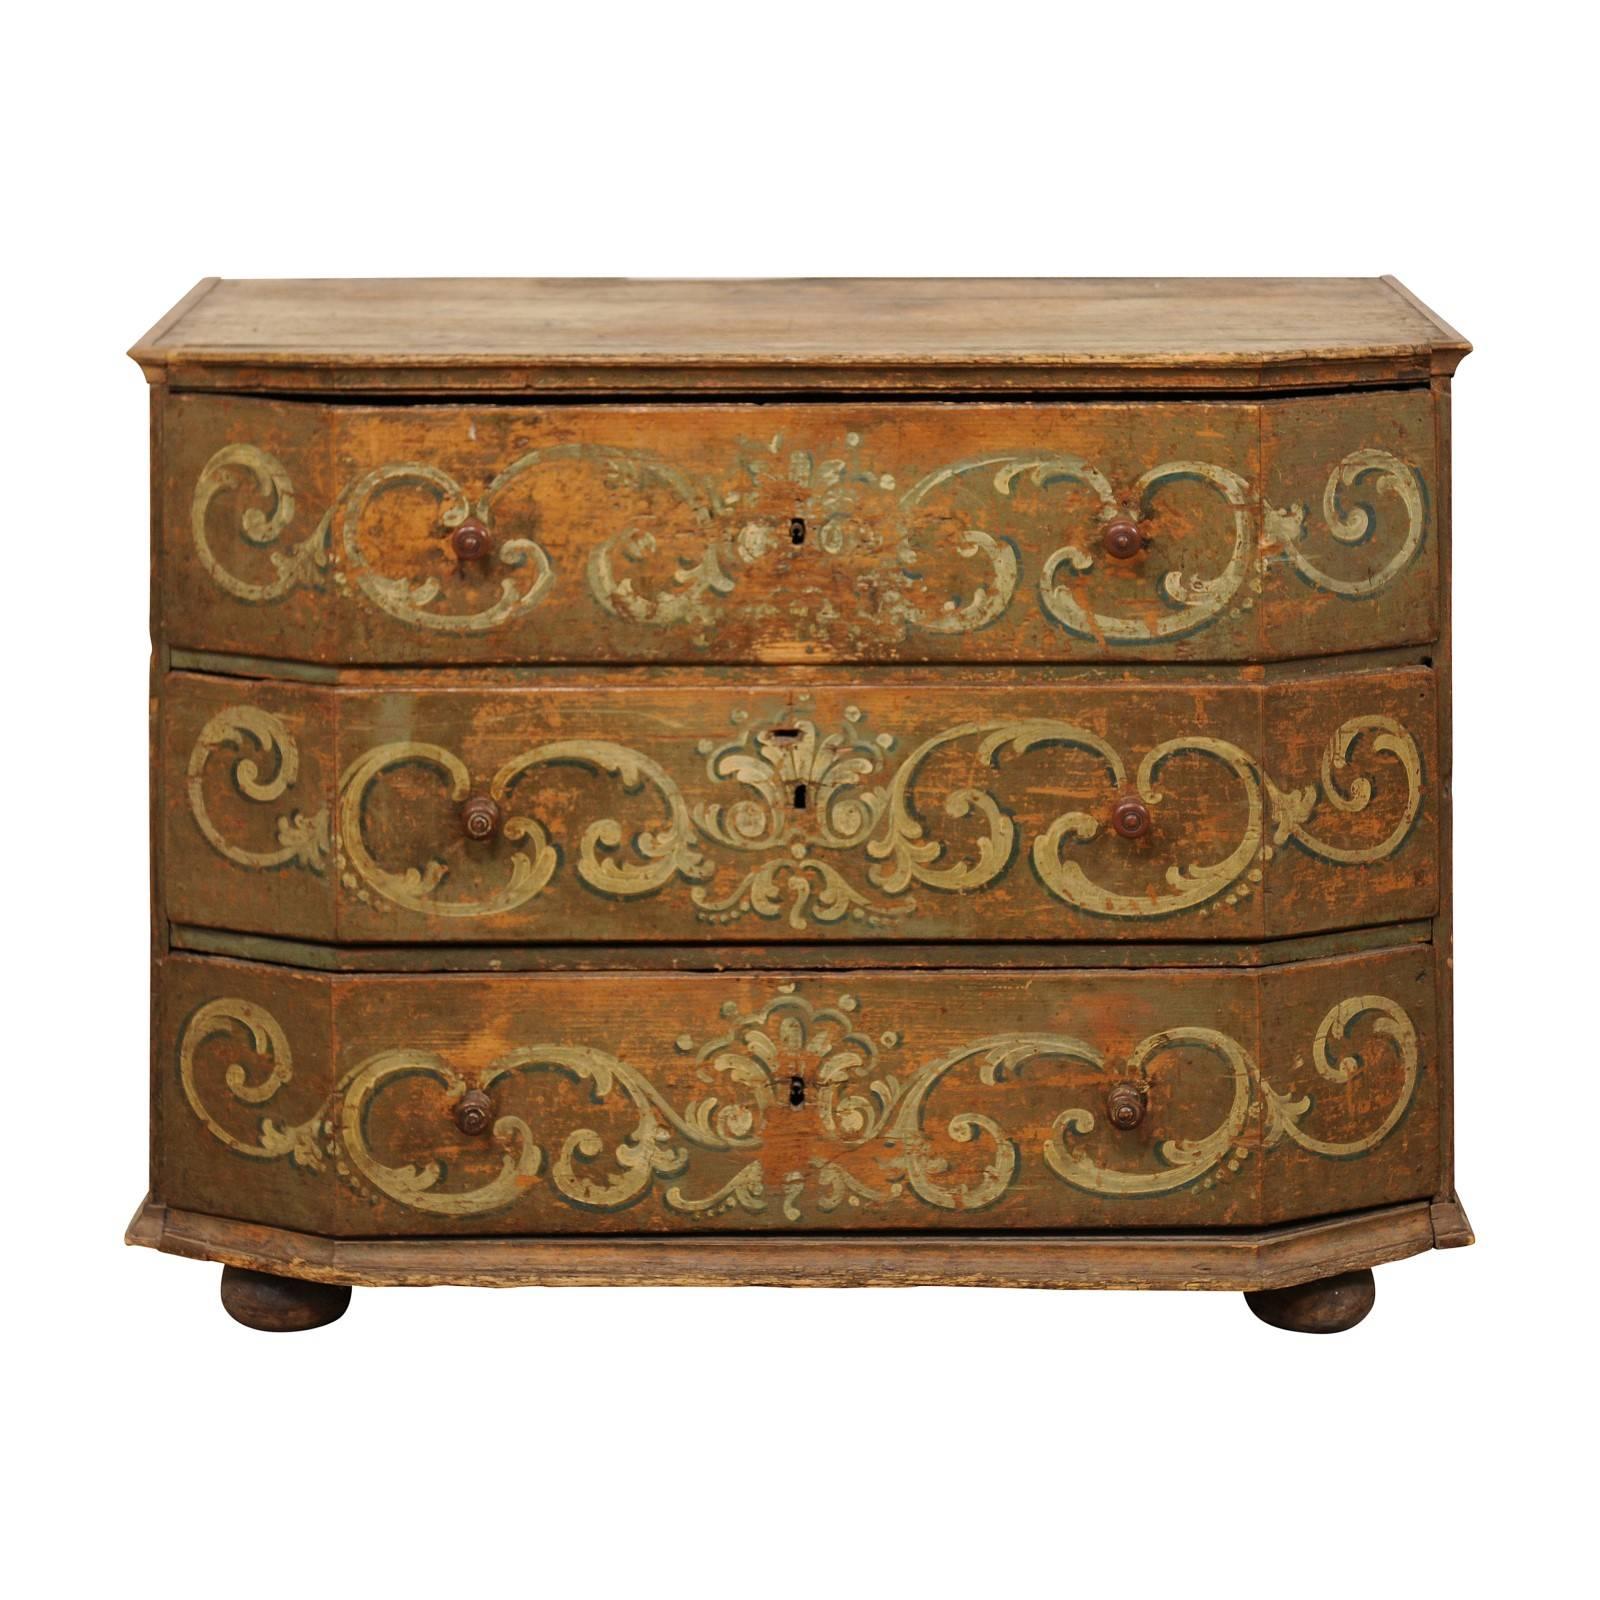 A Large 18th Century Beautifully Hand-Painted Wood Three-Drawer Commode, Italy  For Sale